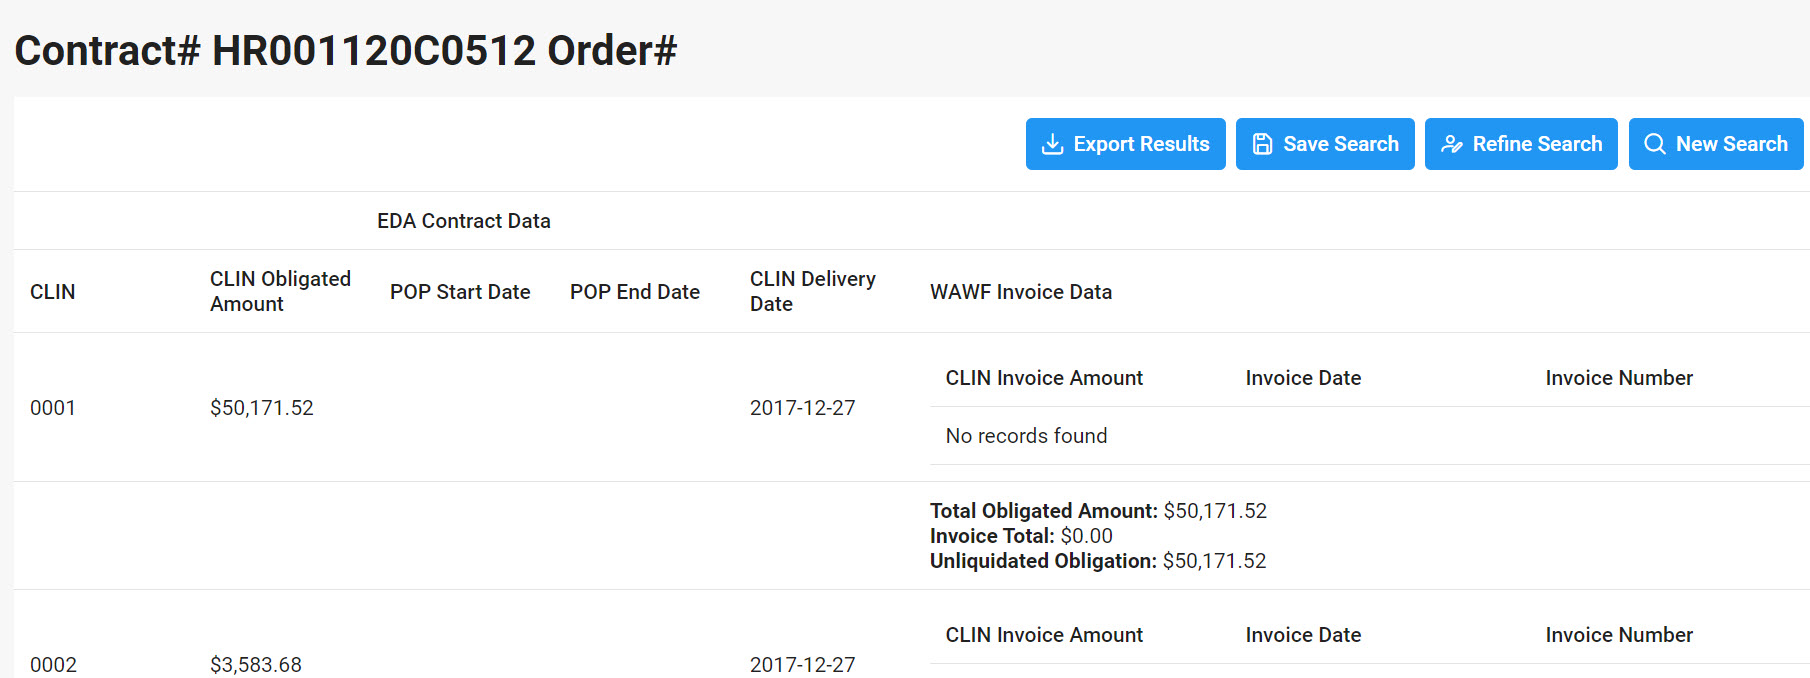 The image provides a preview of the Contract Invoice History Report Overview.